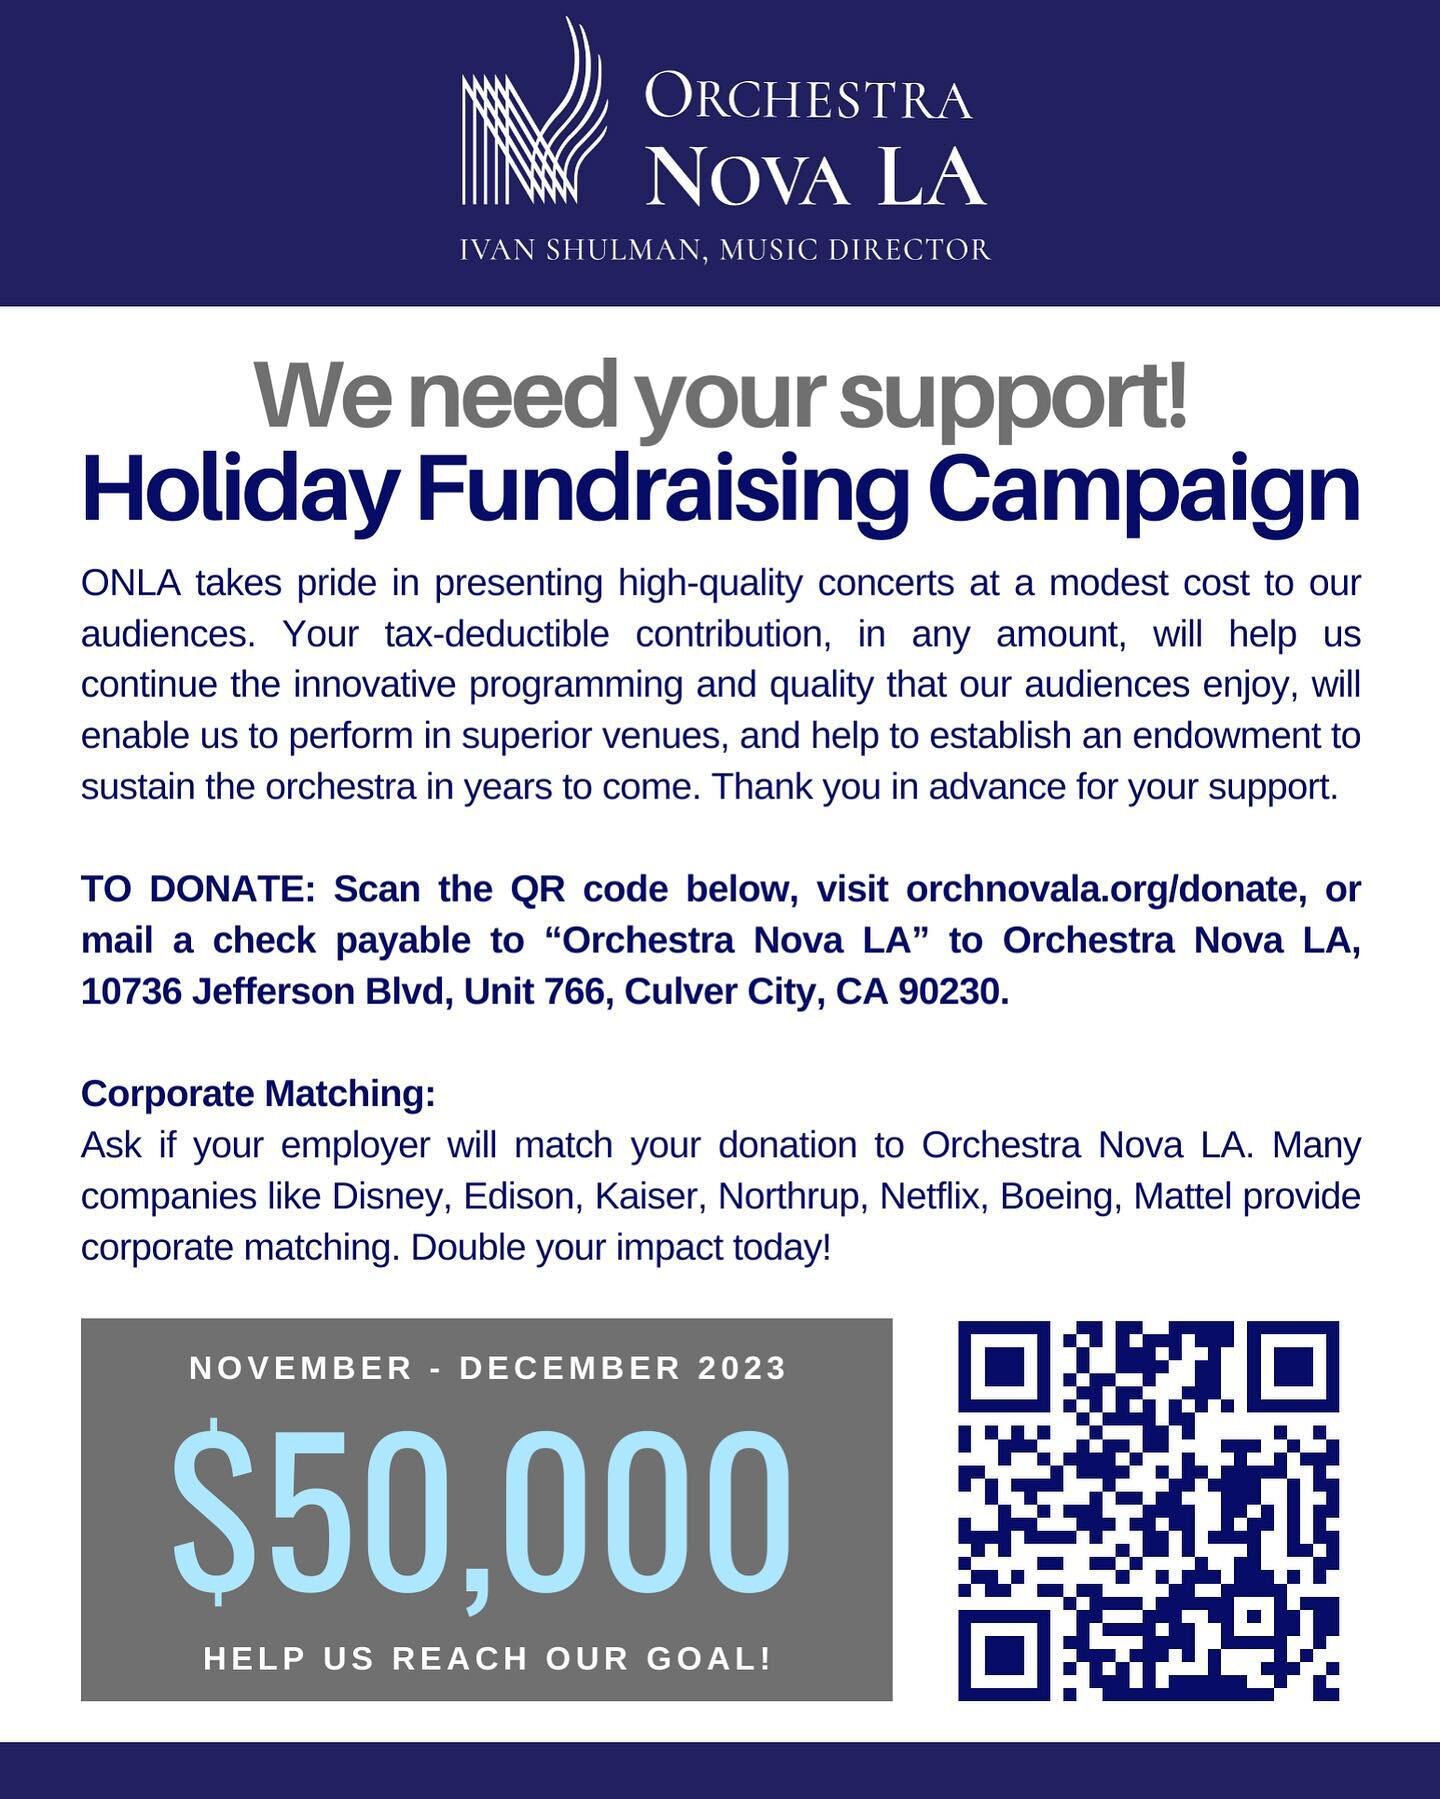 We need your help! Please consider supporting ONLA this holiday season. Visit orchnovala.org/donate